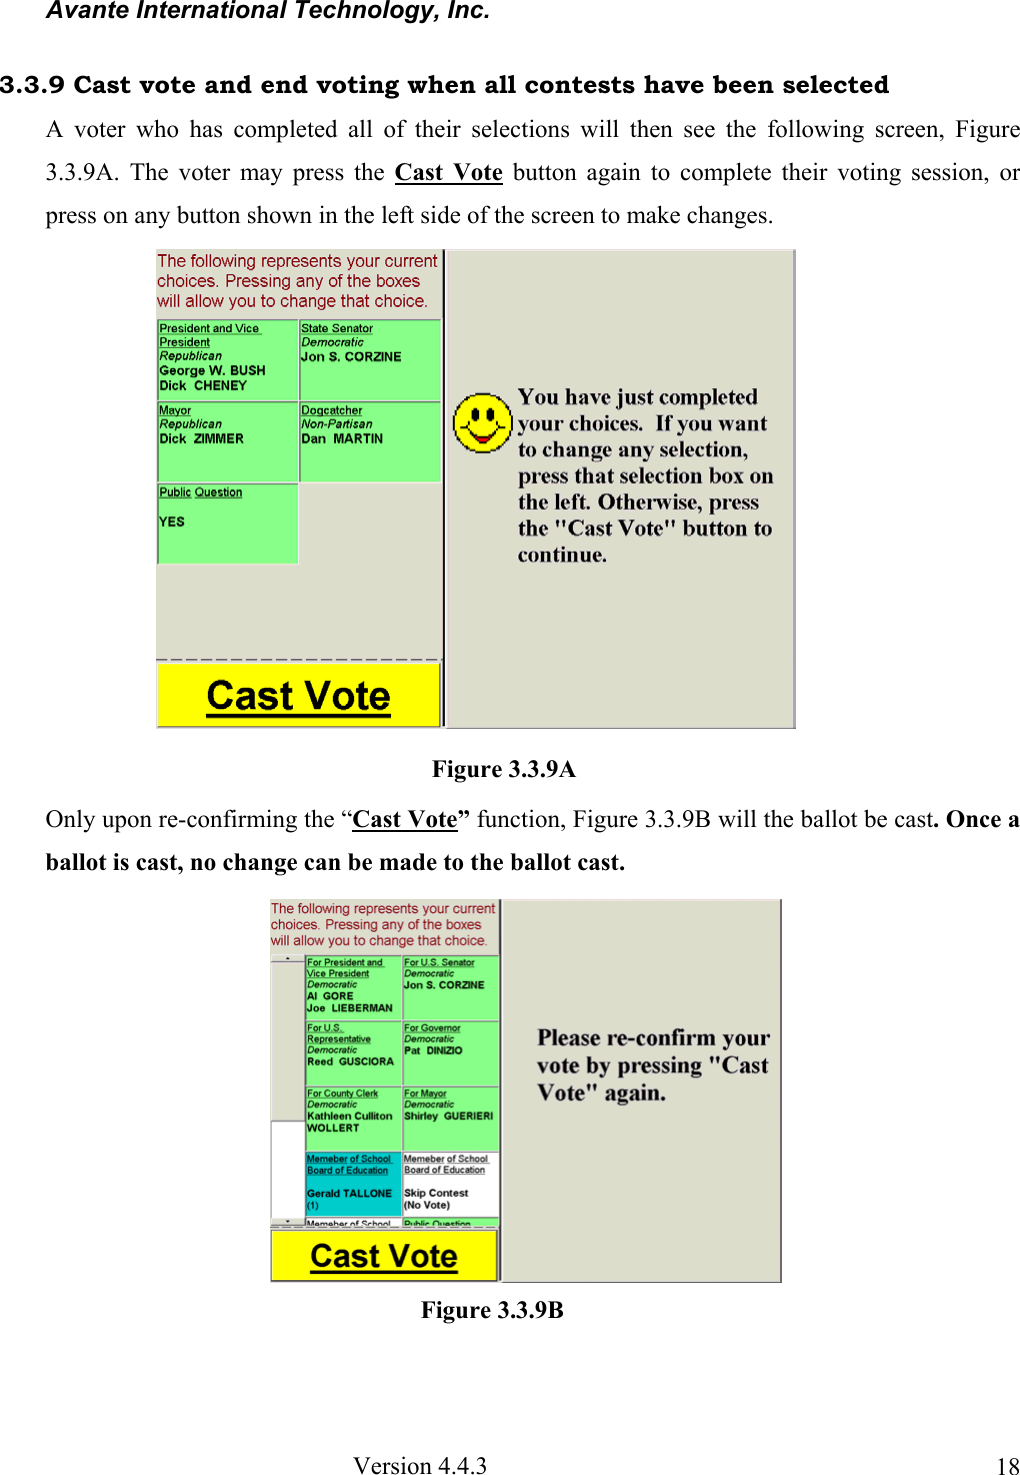 Avante International Technology, Inc.  Version 4.4.3  183.3.9 Cast vote and end voting when all contests have been selected A voter who has completed all of their selections will then see the following screen, Figure 3.3.9A. The voter may press the Cast Vote button again to complete their voting session, or press on any button shown in the left side of the screen to make changes.              Only upon re-confirming the “Cast Vote” function, Figure 3.3.9B will the ballot be cast. Once a ballot is cast, no change can be made to the ballot cast.   Figure 3.3.9A Figure 3.3.9B 